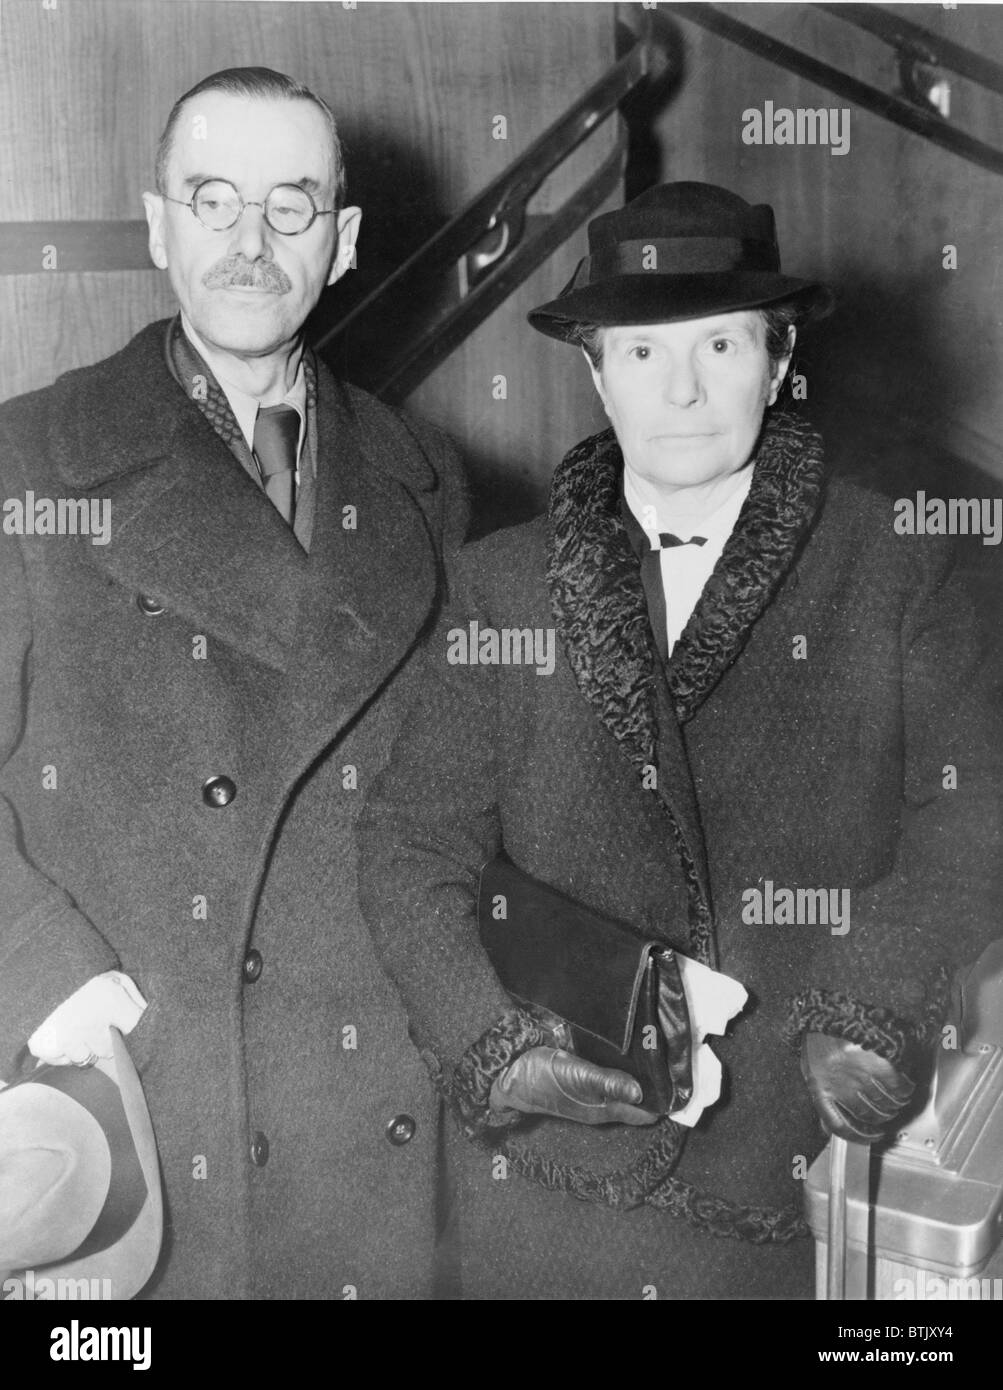 Thomas Mann (1875-1955) and wife, Katia, in 1938, as they arrived to spend the WWII years in exile in Princeton, NJ. Thomas Mann, a German, won the 1929 Nobel Prize for Literature. Stock Photo